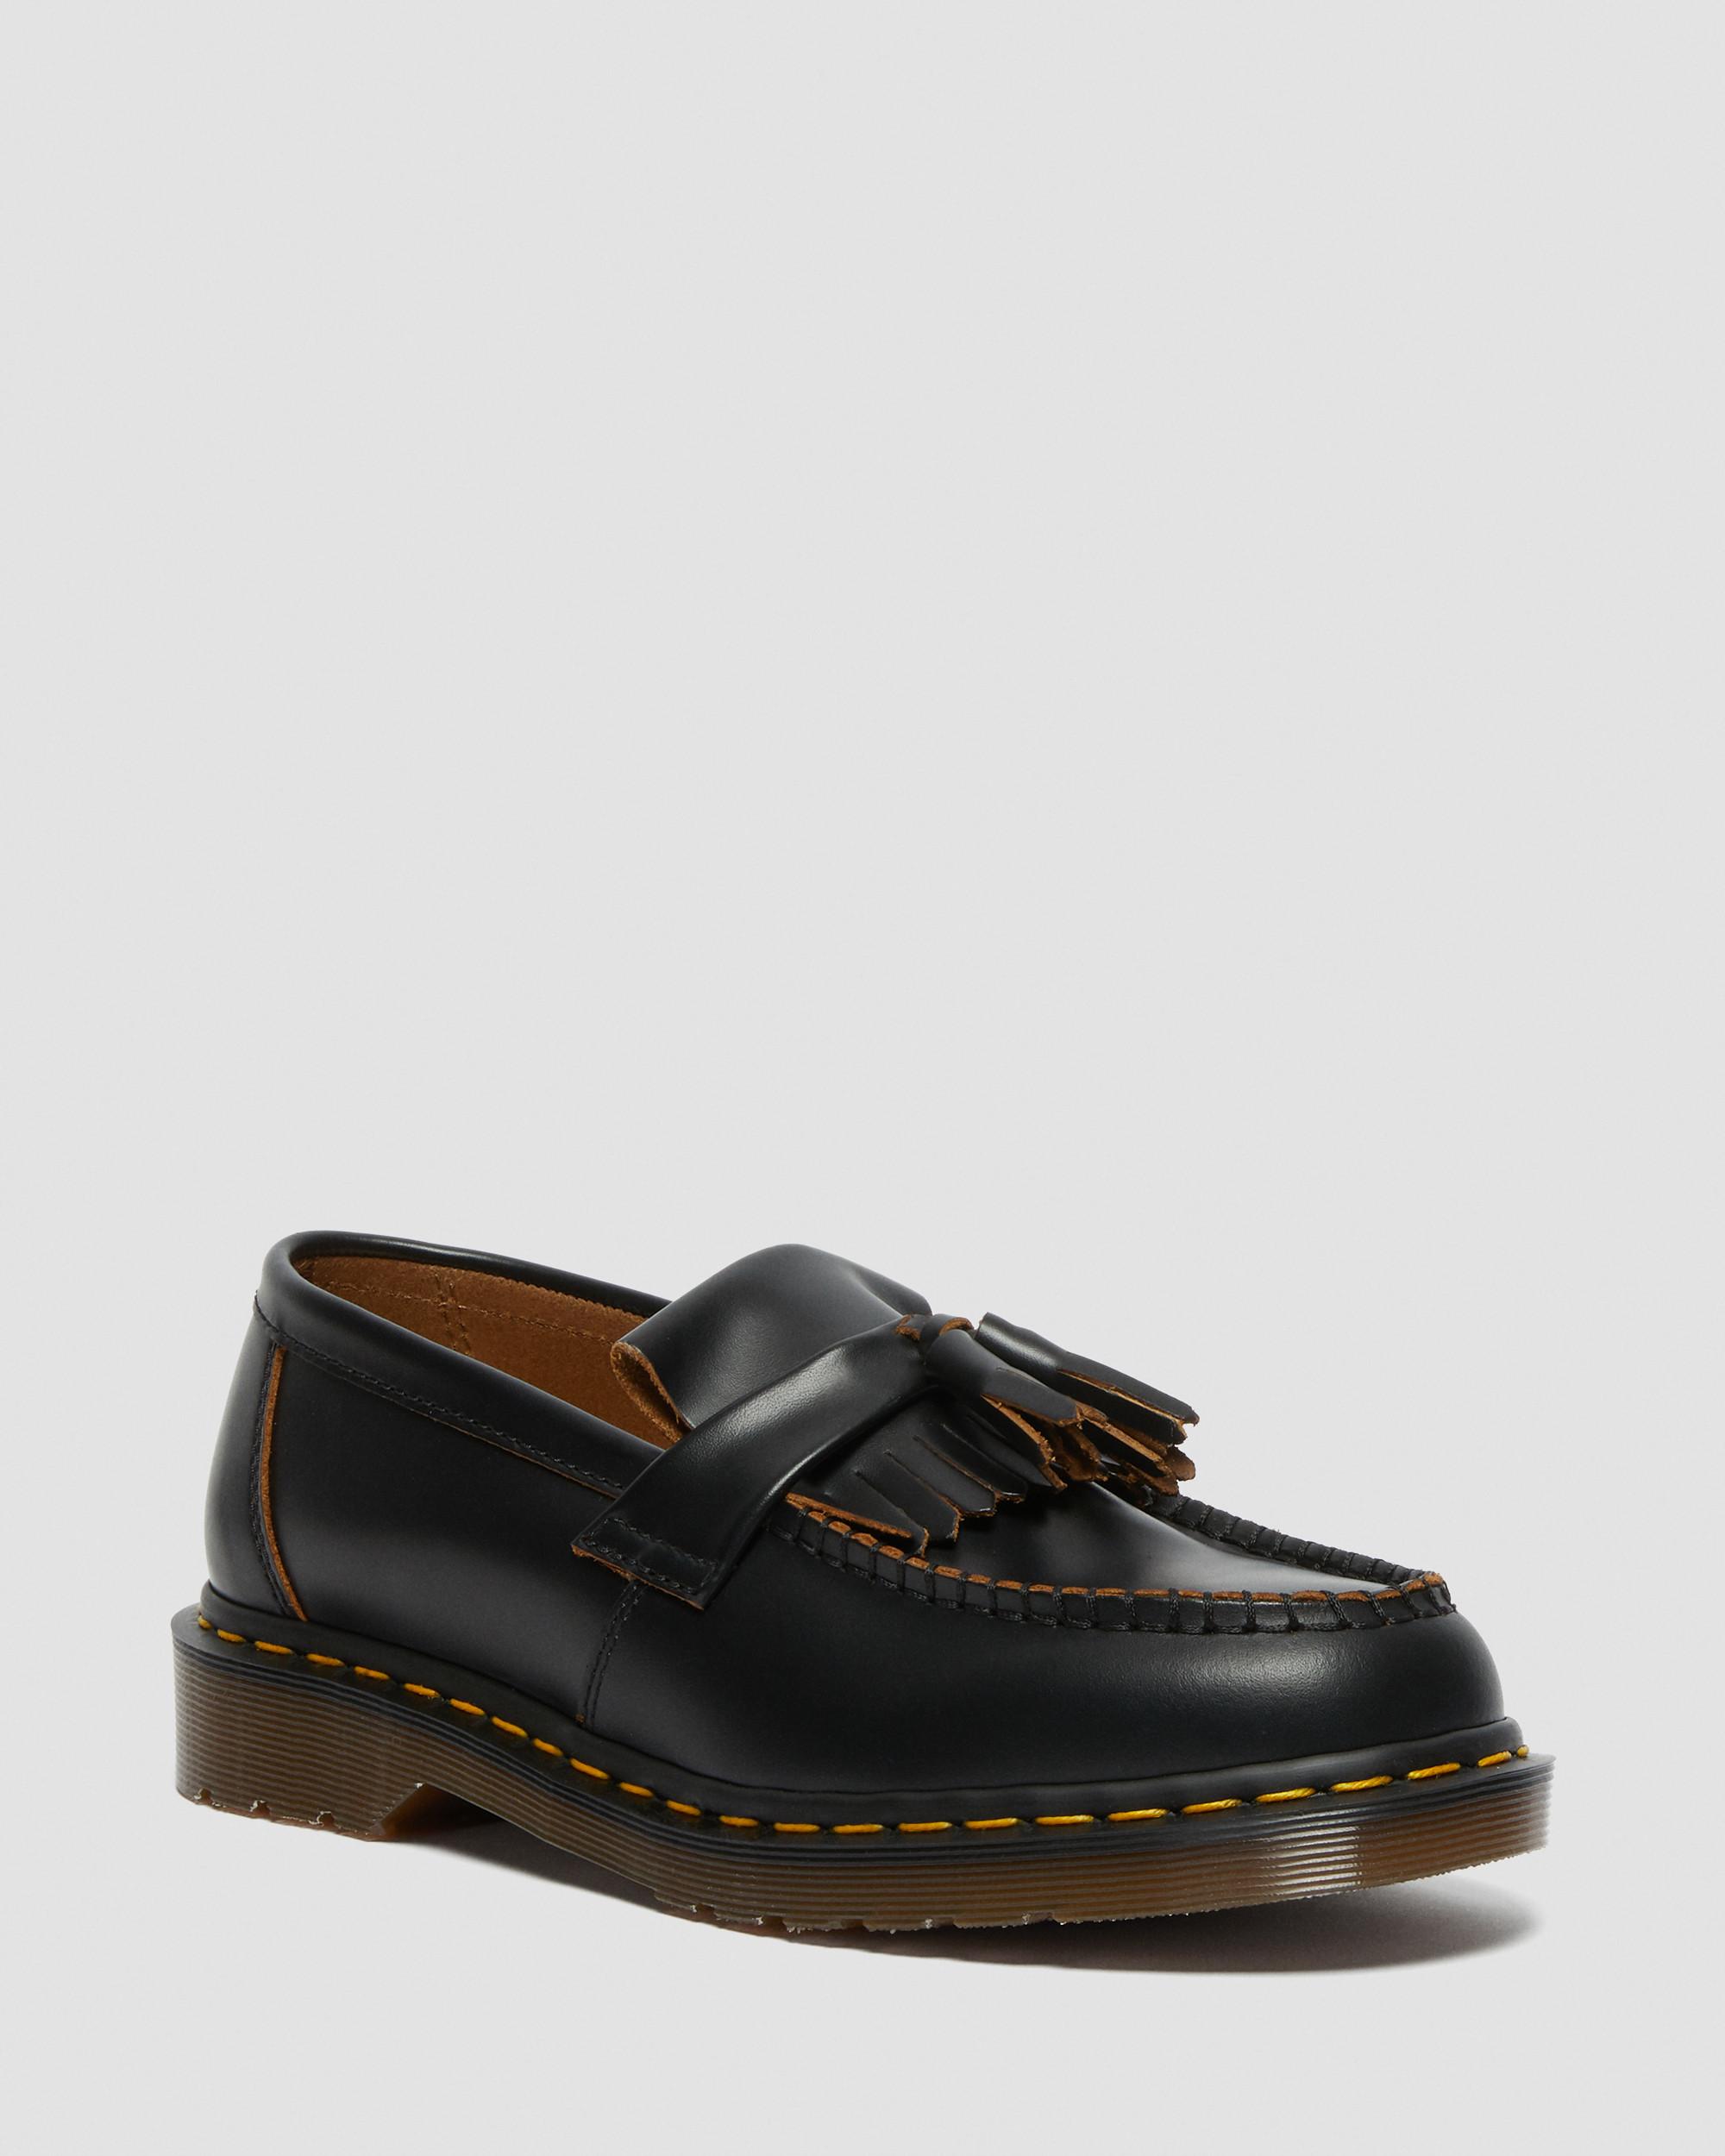 Adrian Made in England Quilon Leather Tassel Loafers | Dr. Martens